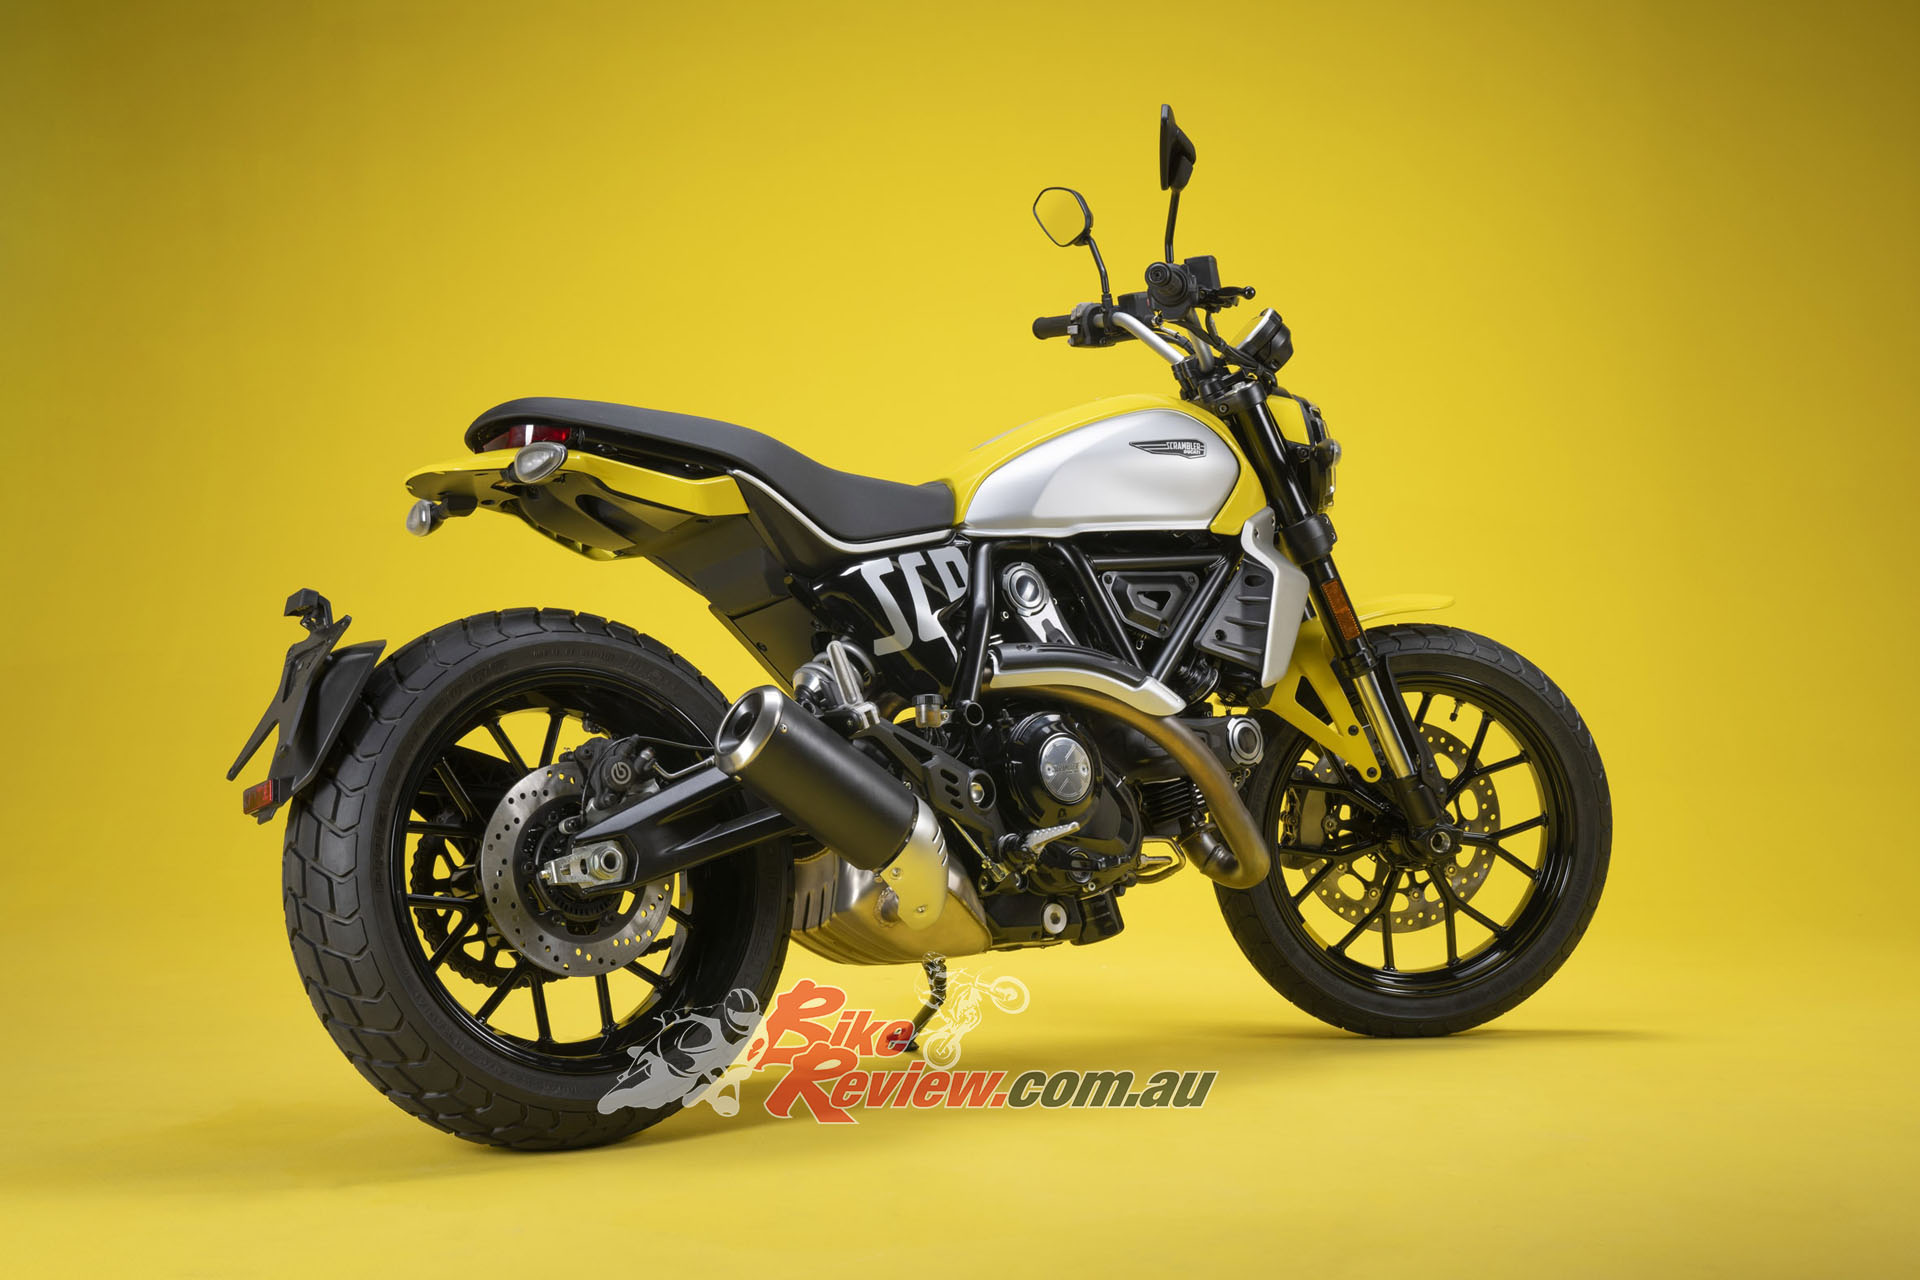 The Ducati Scrambler Icon features a revised handlebar that is lower and closer to the rider, allowing more control over the bike.